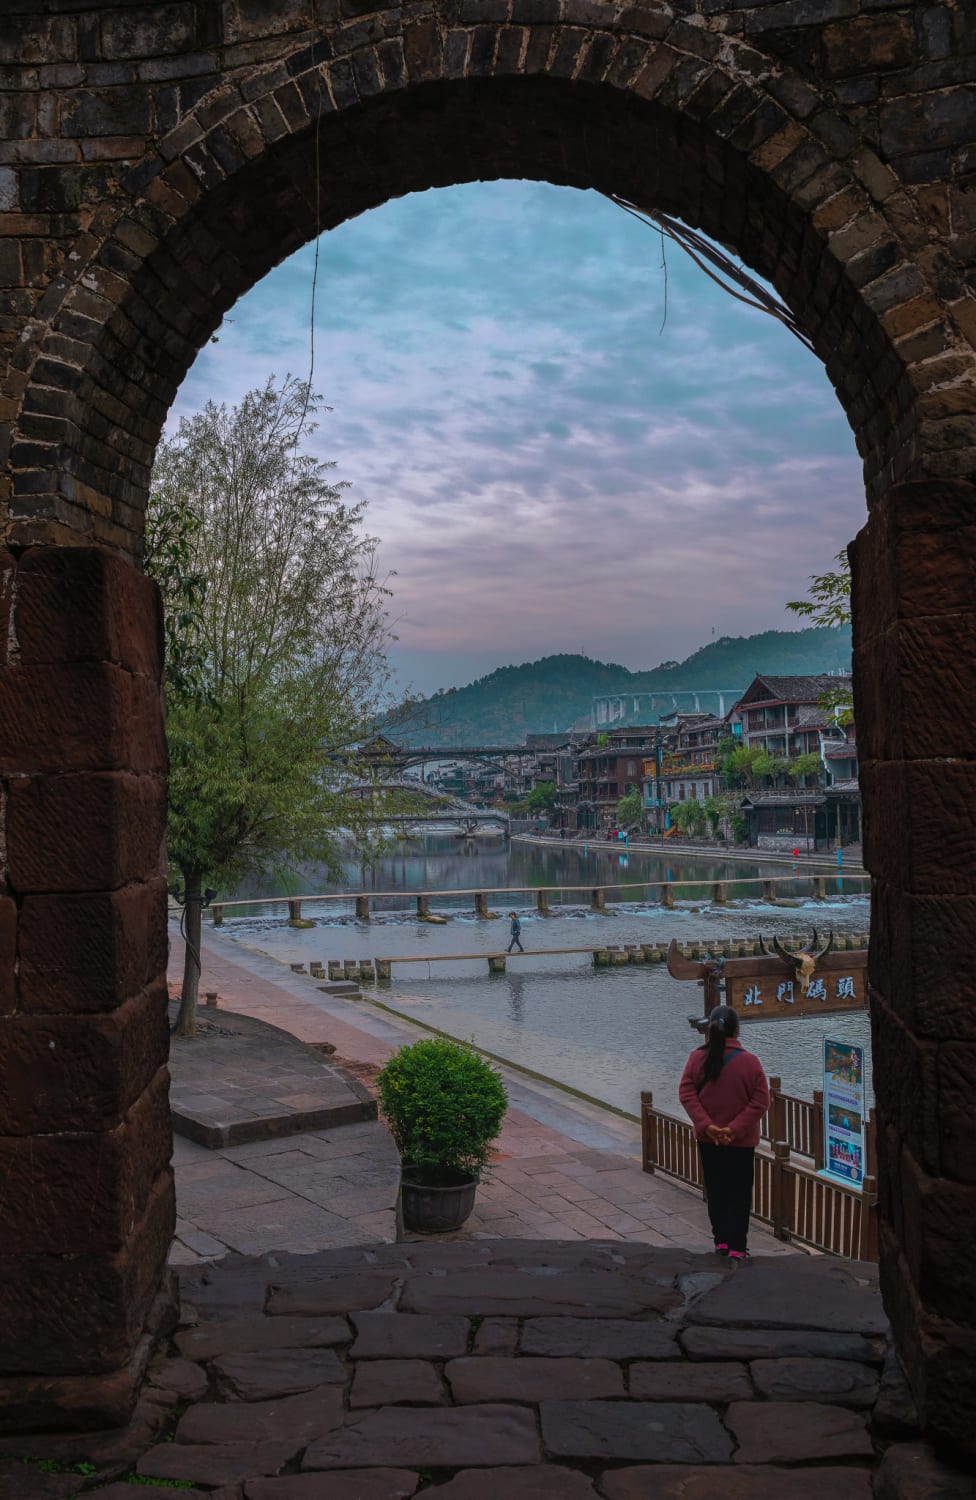 Phoenix ancient city, Fenghuang County, China